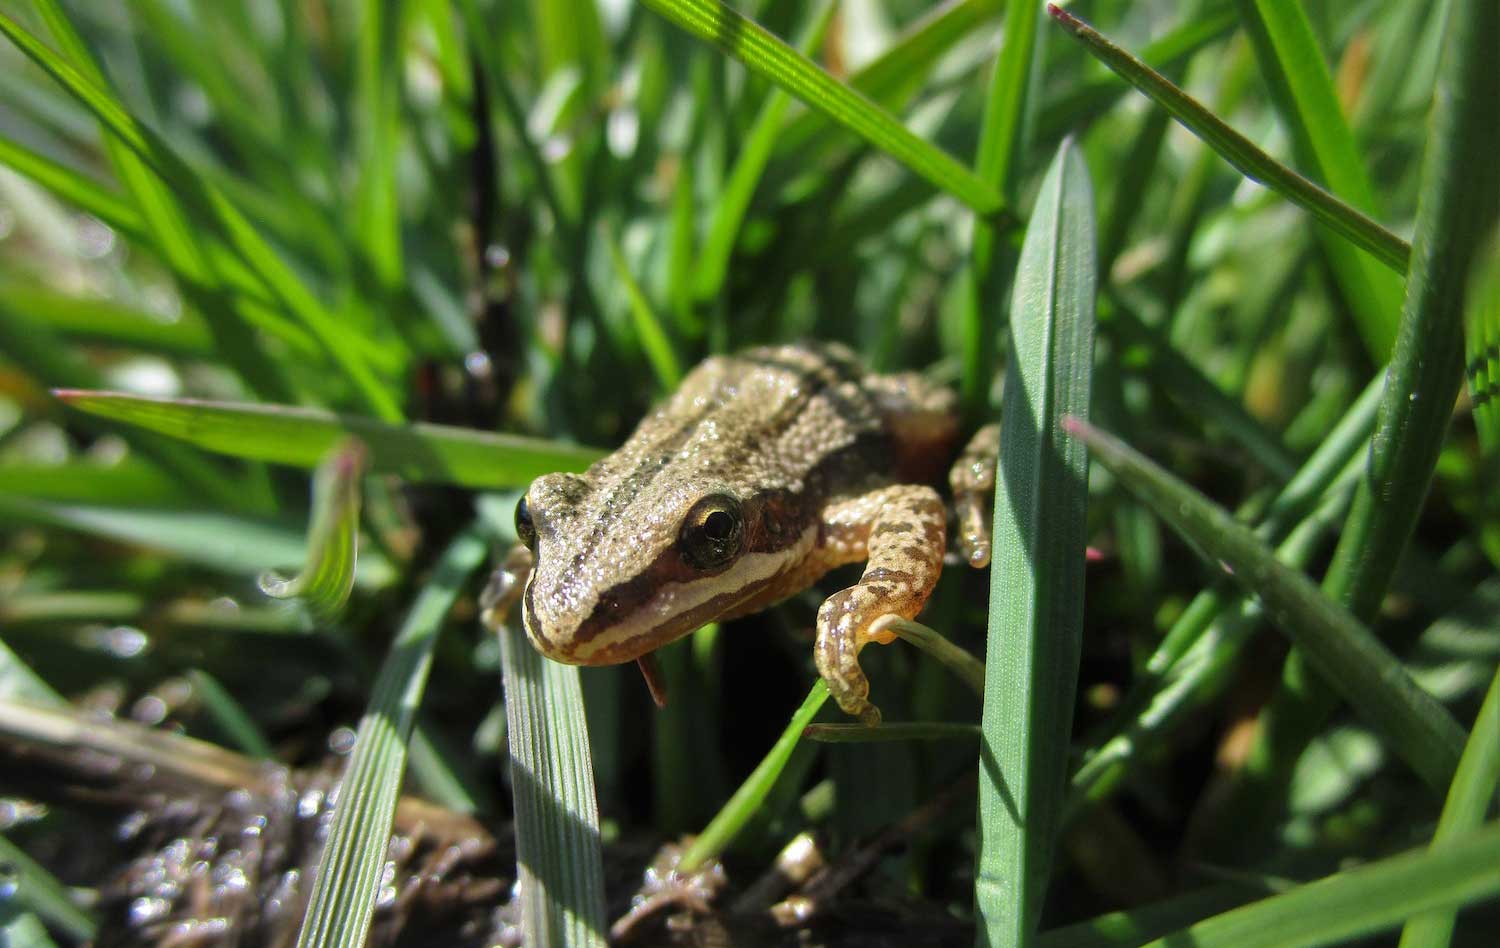 Chorus frog in the grass